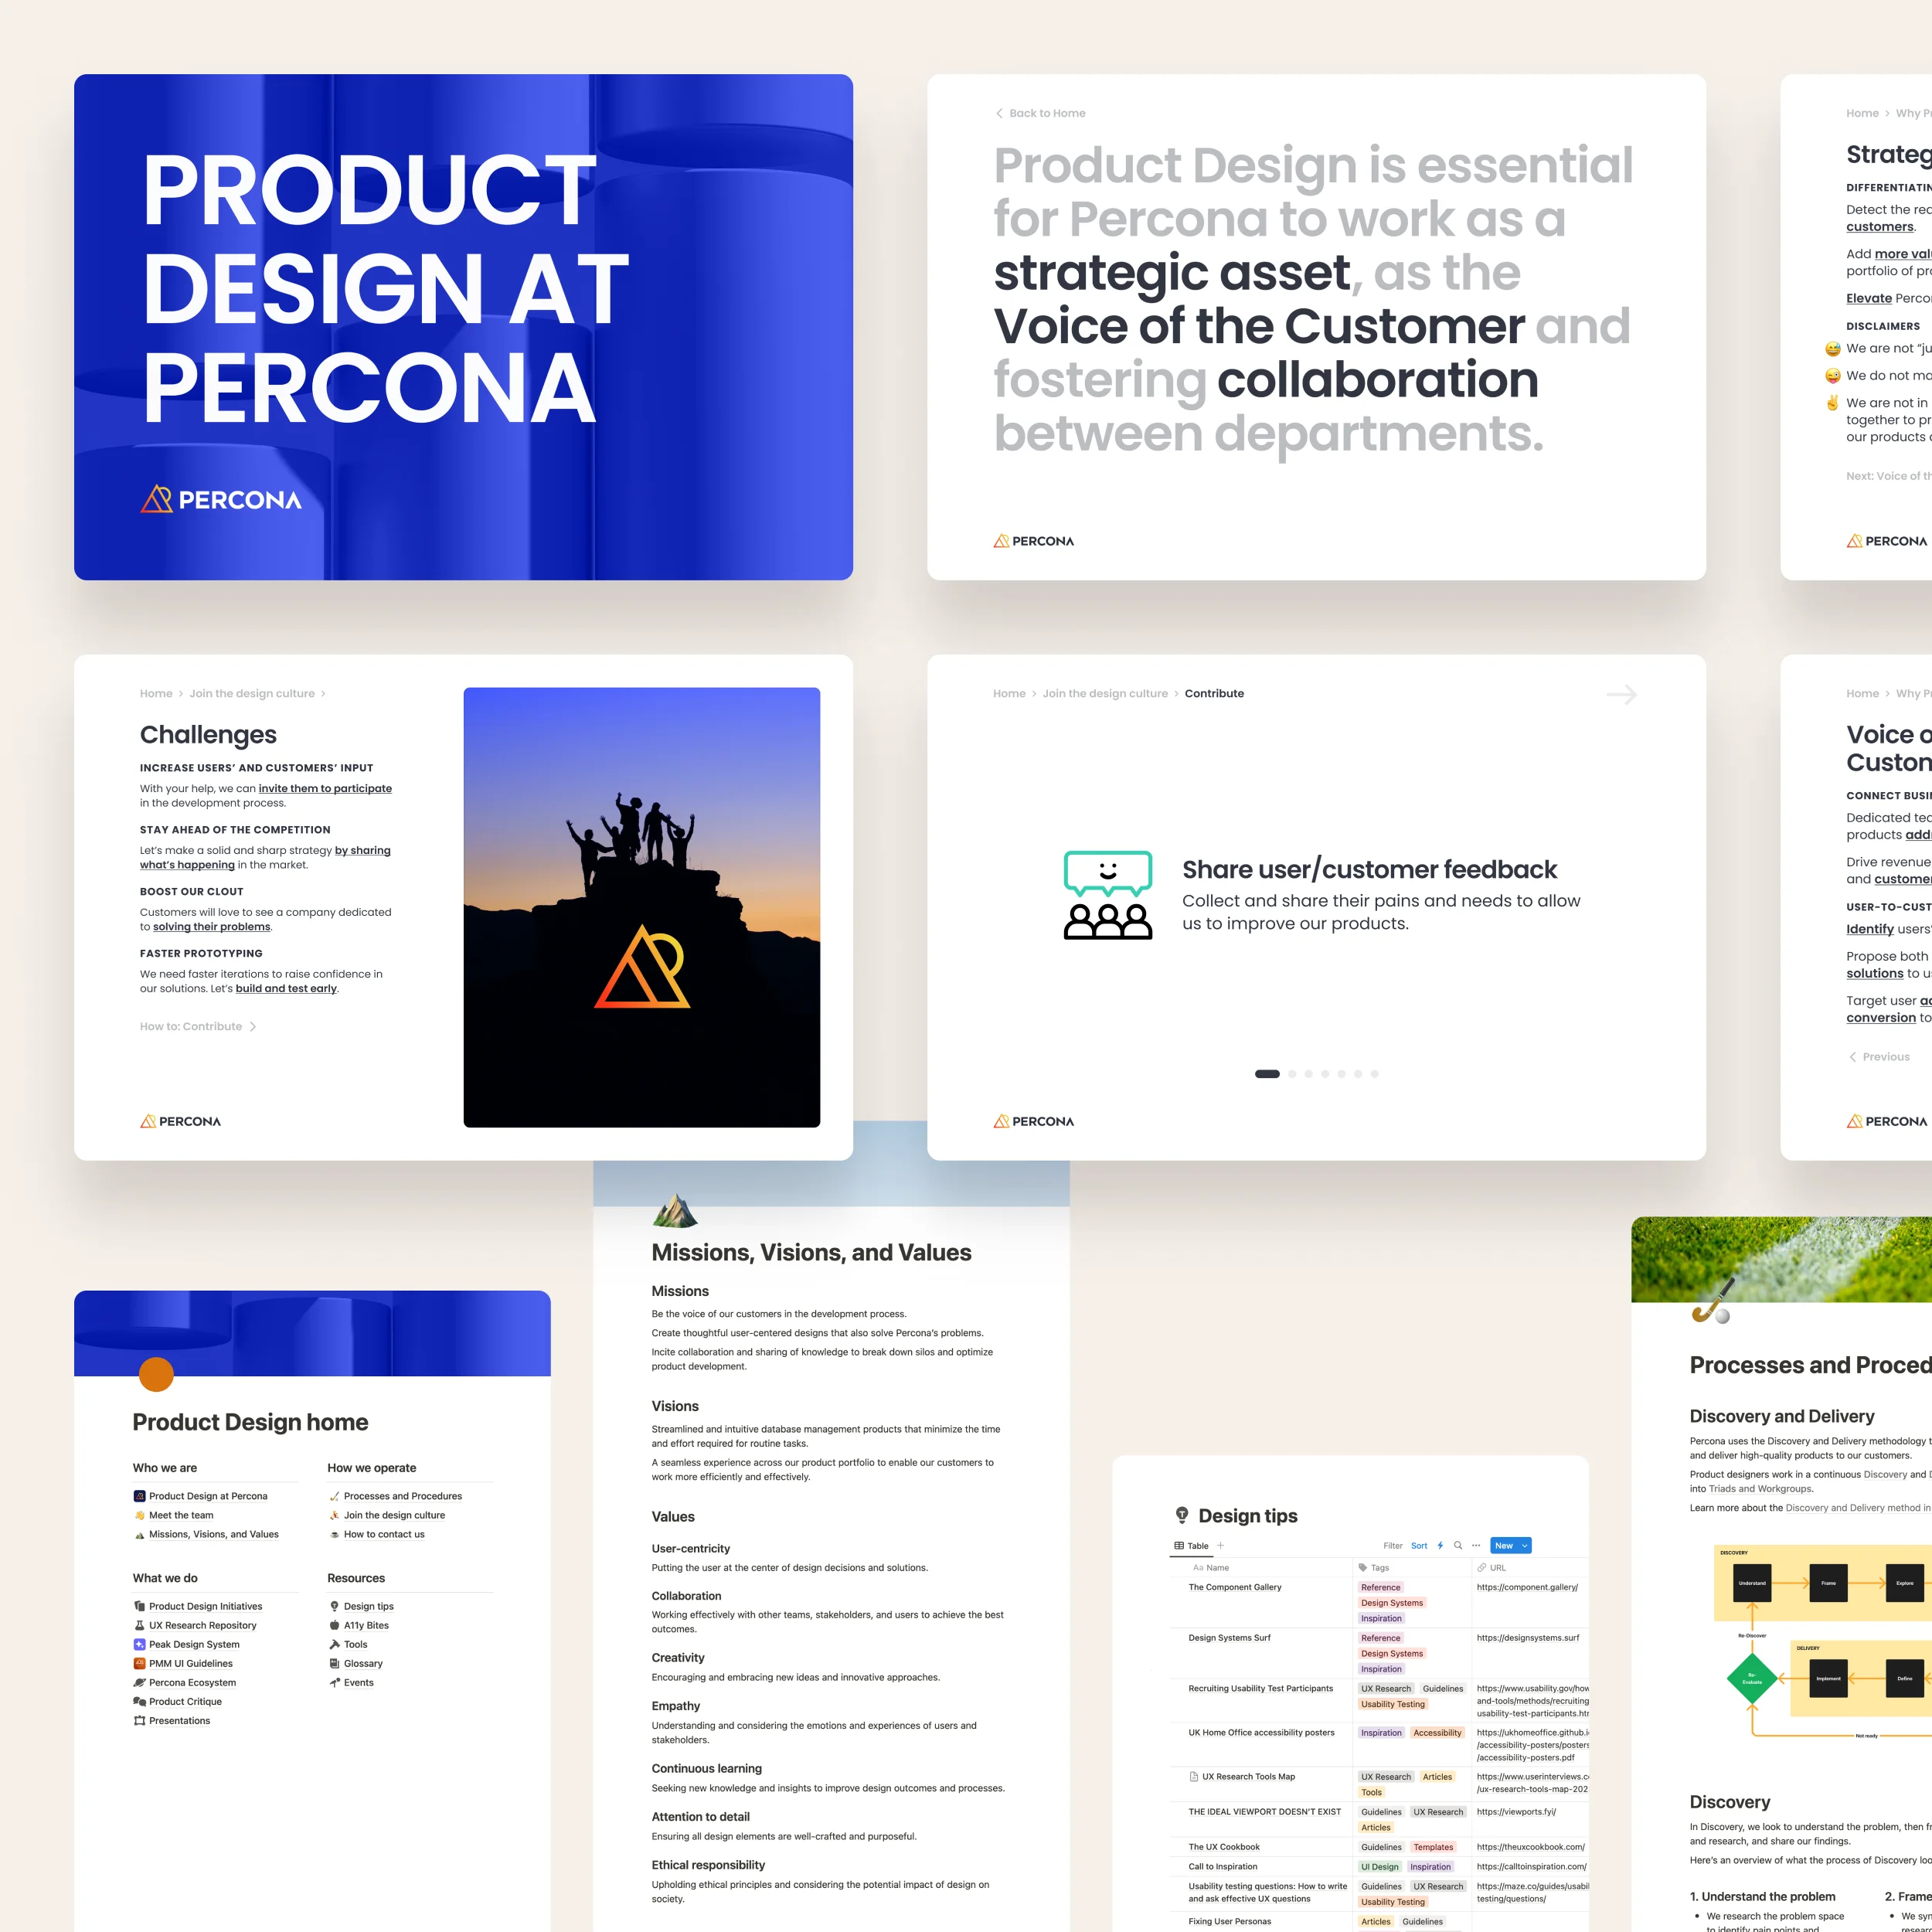 Compilation of screenshots of documentation pages and presentation slides. It has mostly written content about Percona processes and procedures when designing products.